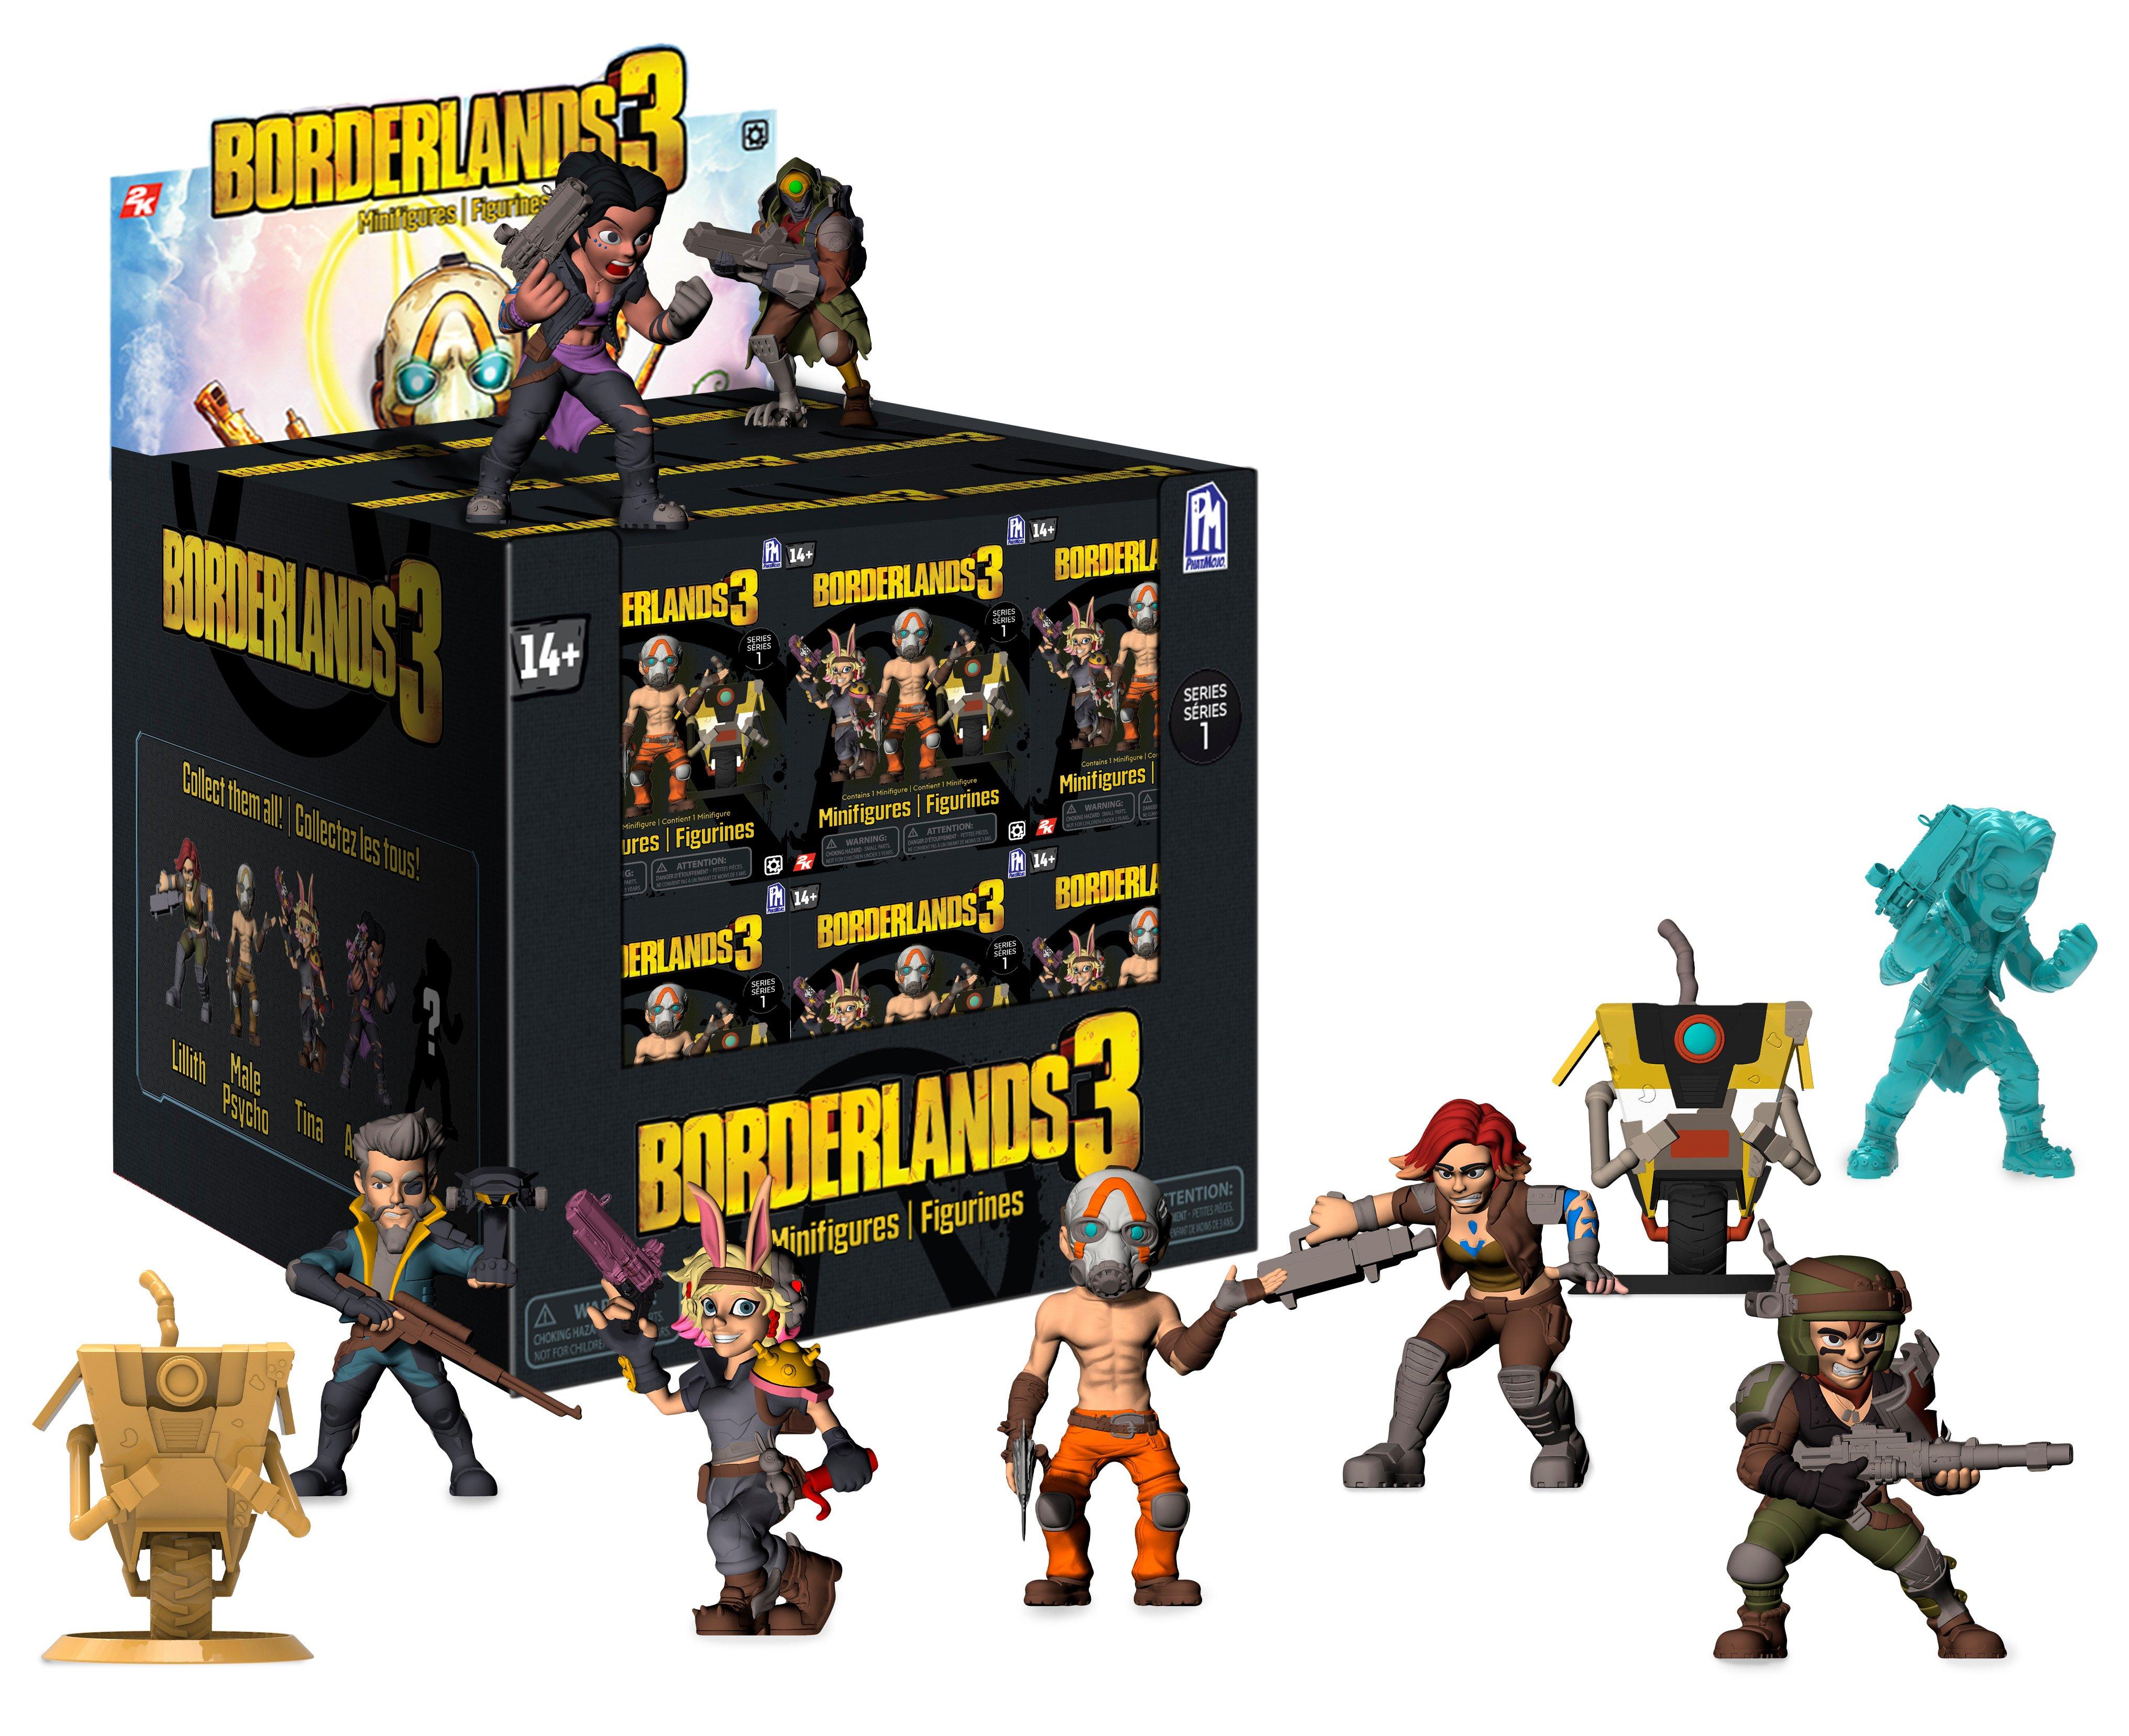 Borderlands 3 Series 1 Blind Box Minfigure Gamestop - toys games action figures roblox mystery minis blind box